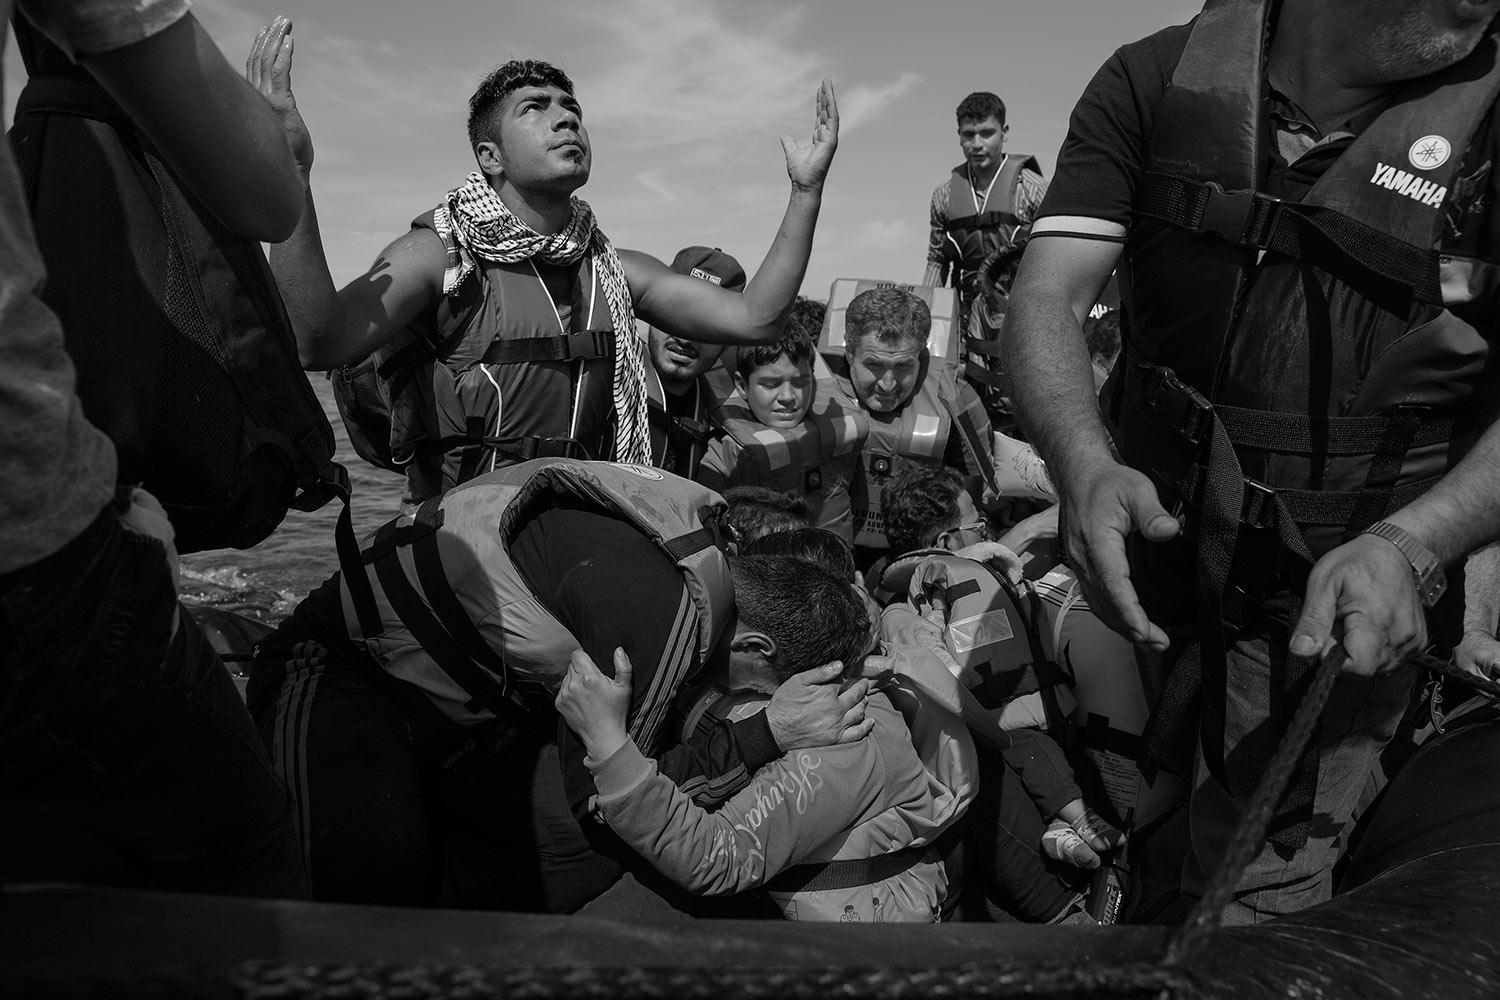 Refugees celebrate after arriving on the beach in Lesbos, Greece. Thousands of migrants each day set out from nearby Turkey for the Greek island, riding in barely seaworthy rubber boats. Some don’t make it, Sept. 26, 2015.